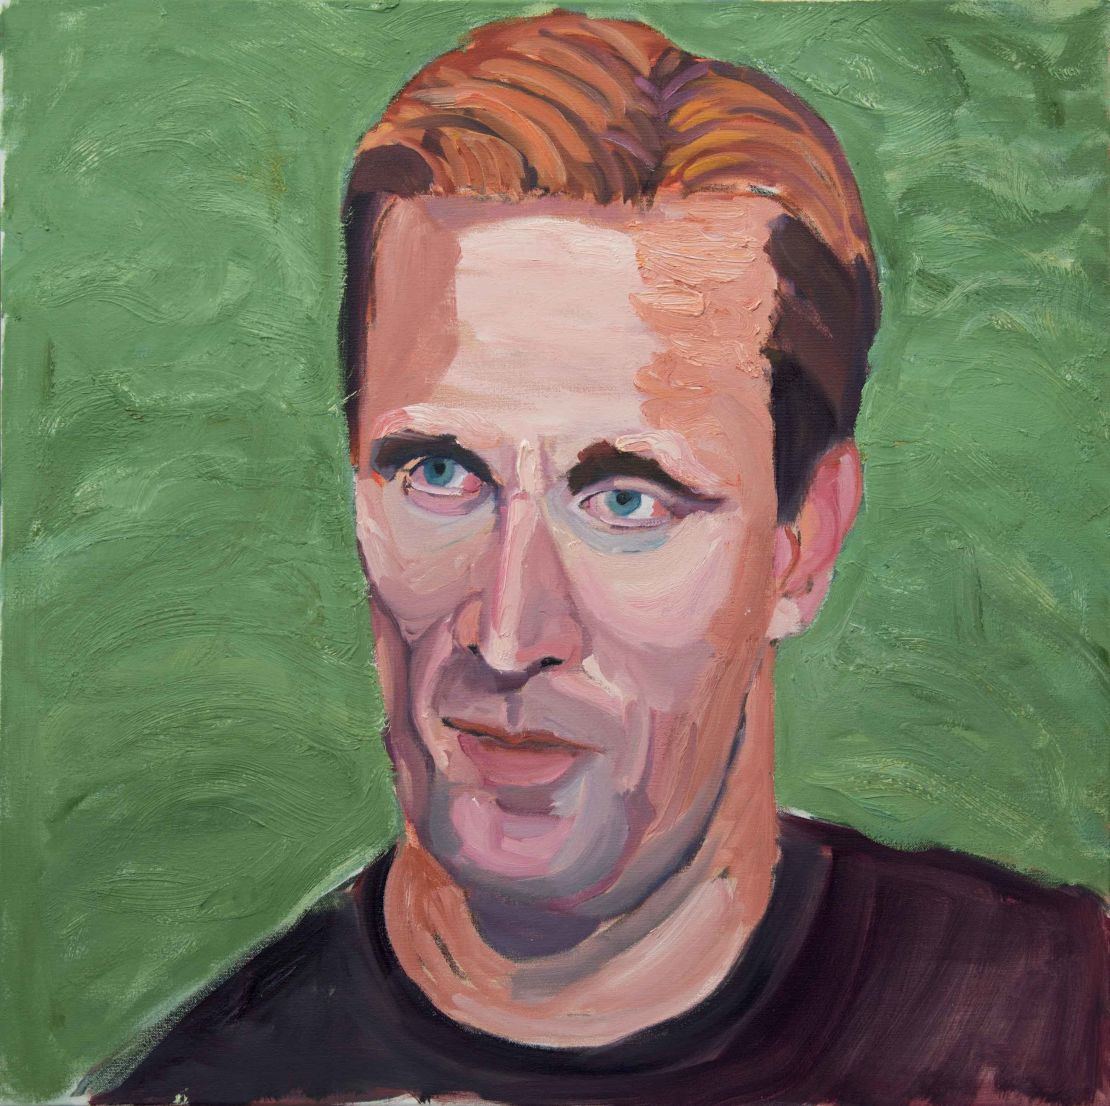 The portraits are thickly painted in the loose, vivid style that Bush has developed since his early experiments with a more photorealistic technique. 